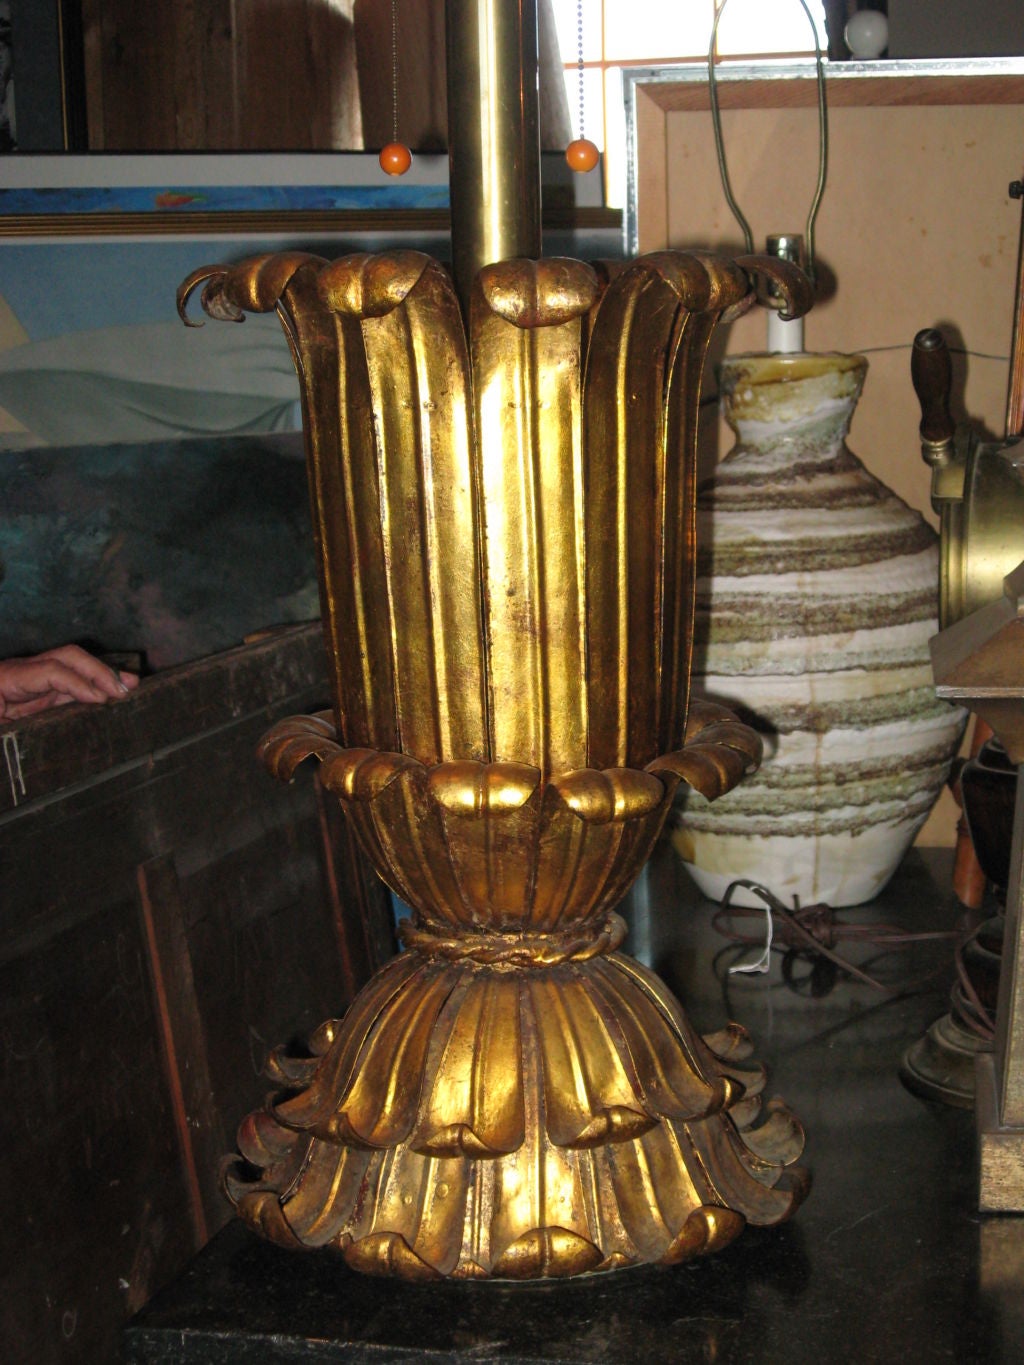 Midcentury Monumental Lamp made by the Marbro Lamp Co.Los Angeles, CA, with original Bakerlite pulls. 